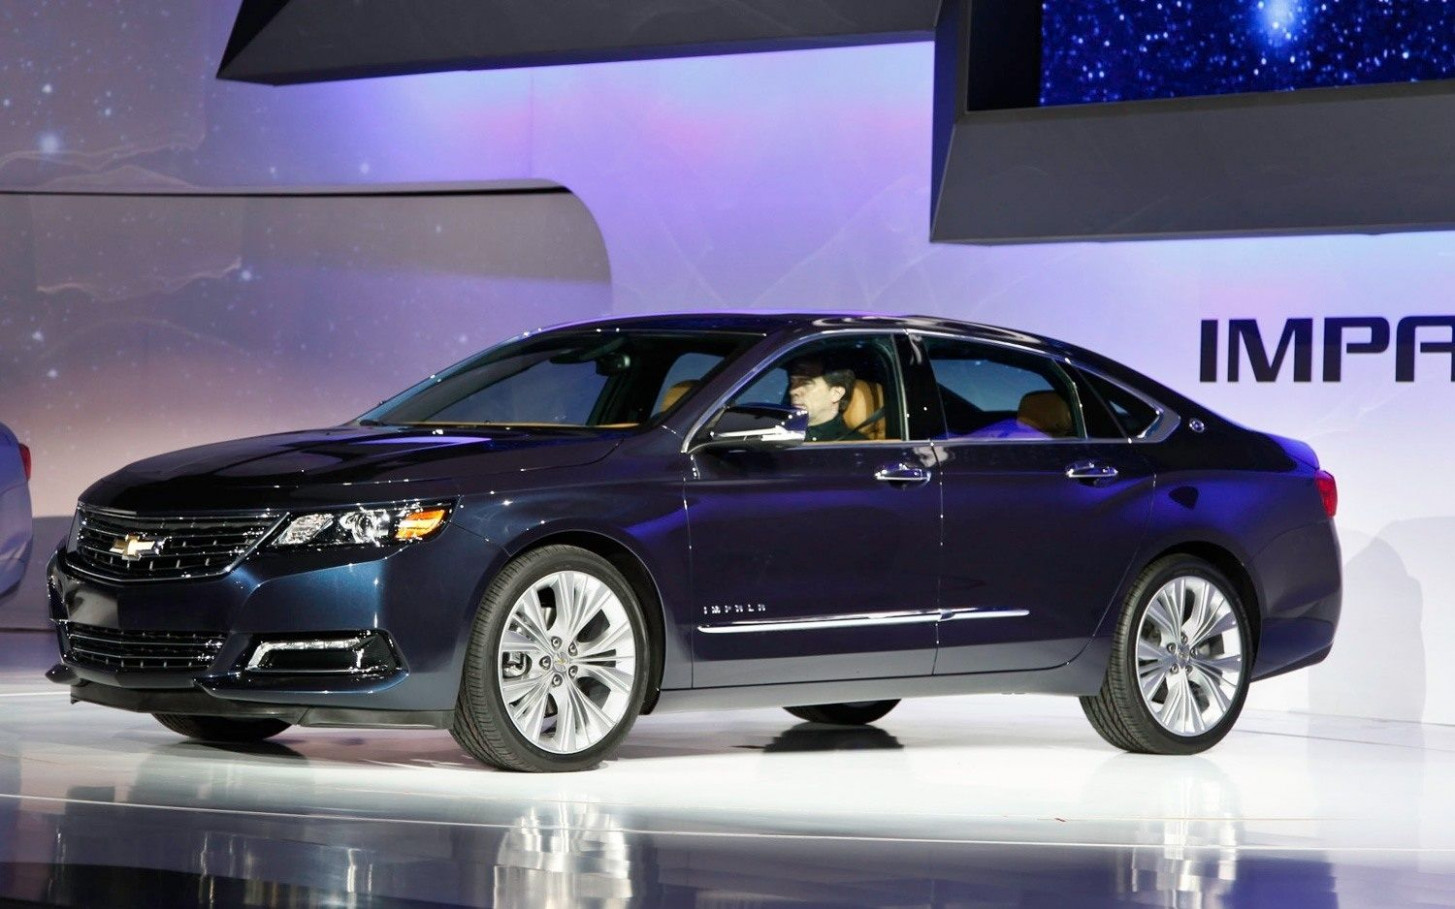 Price Will There Be A 2022 Chevrolet Impala